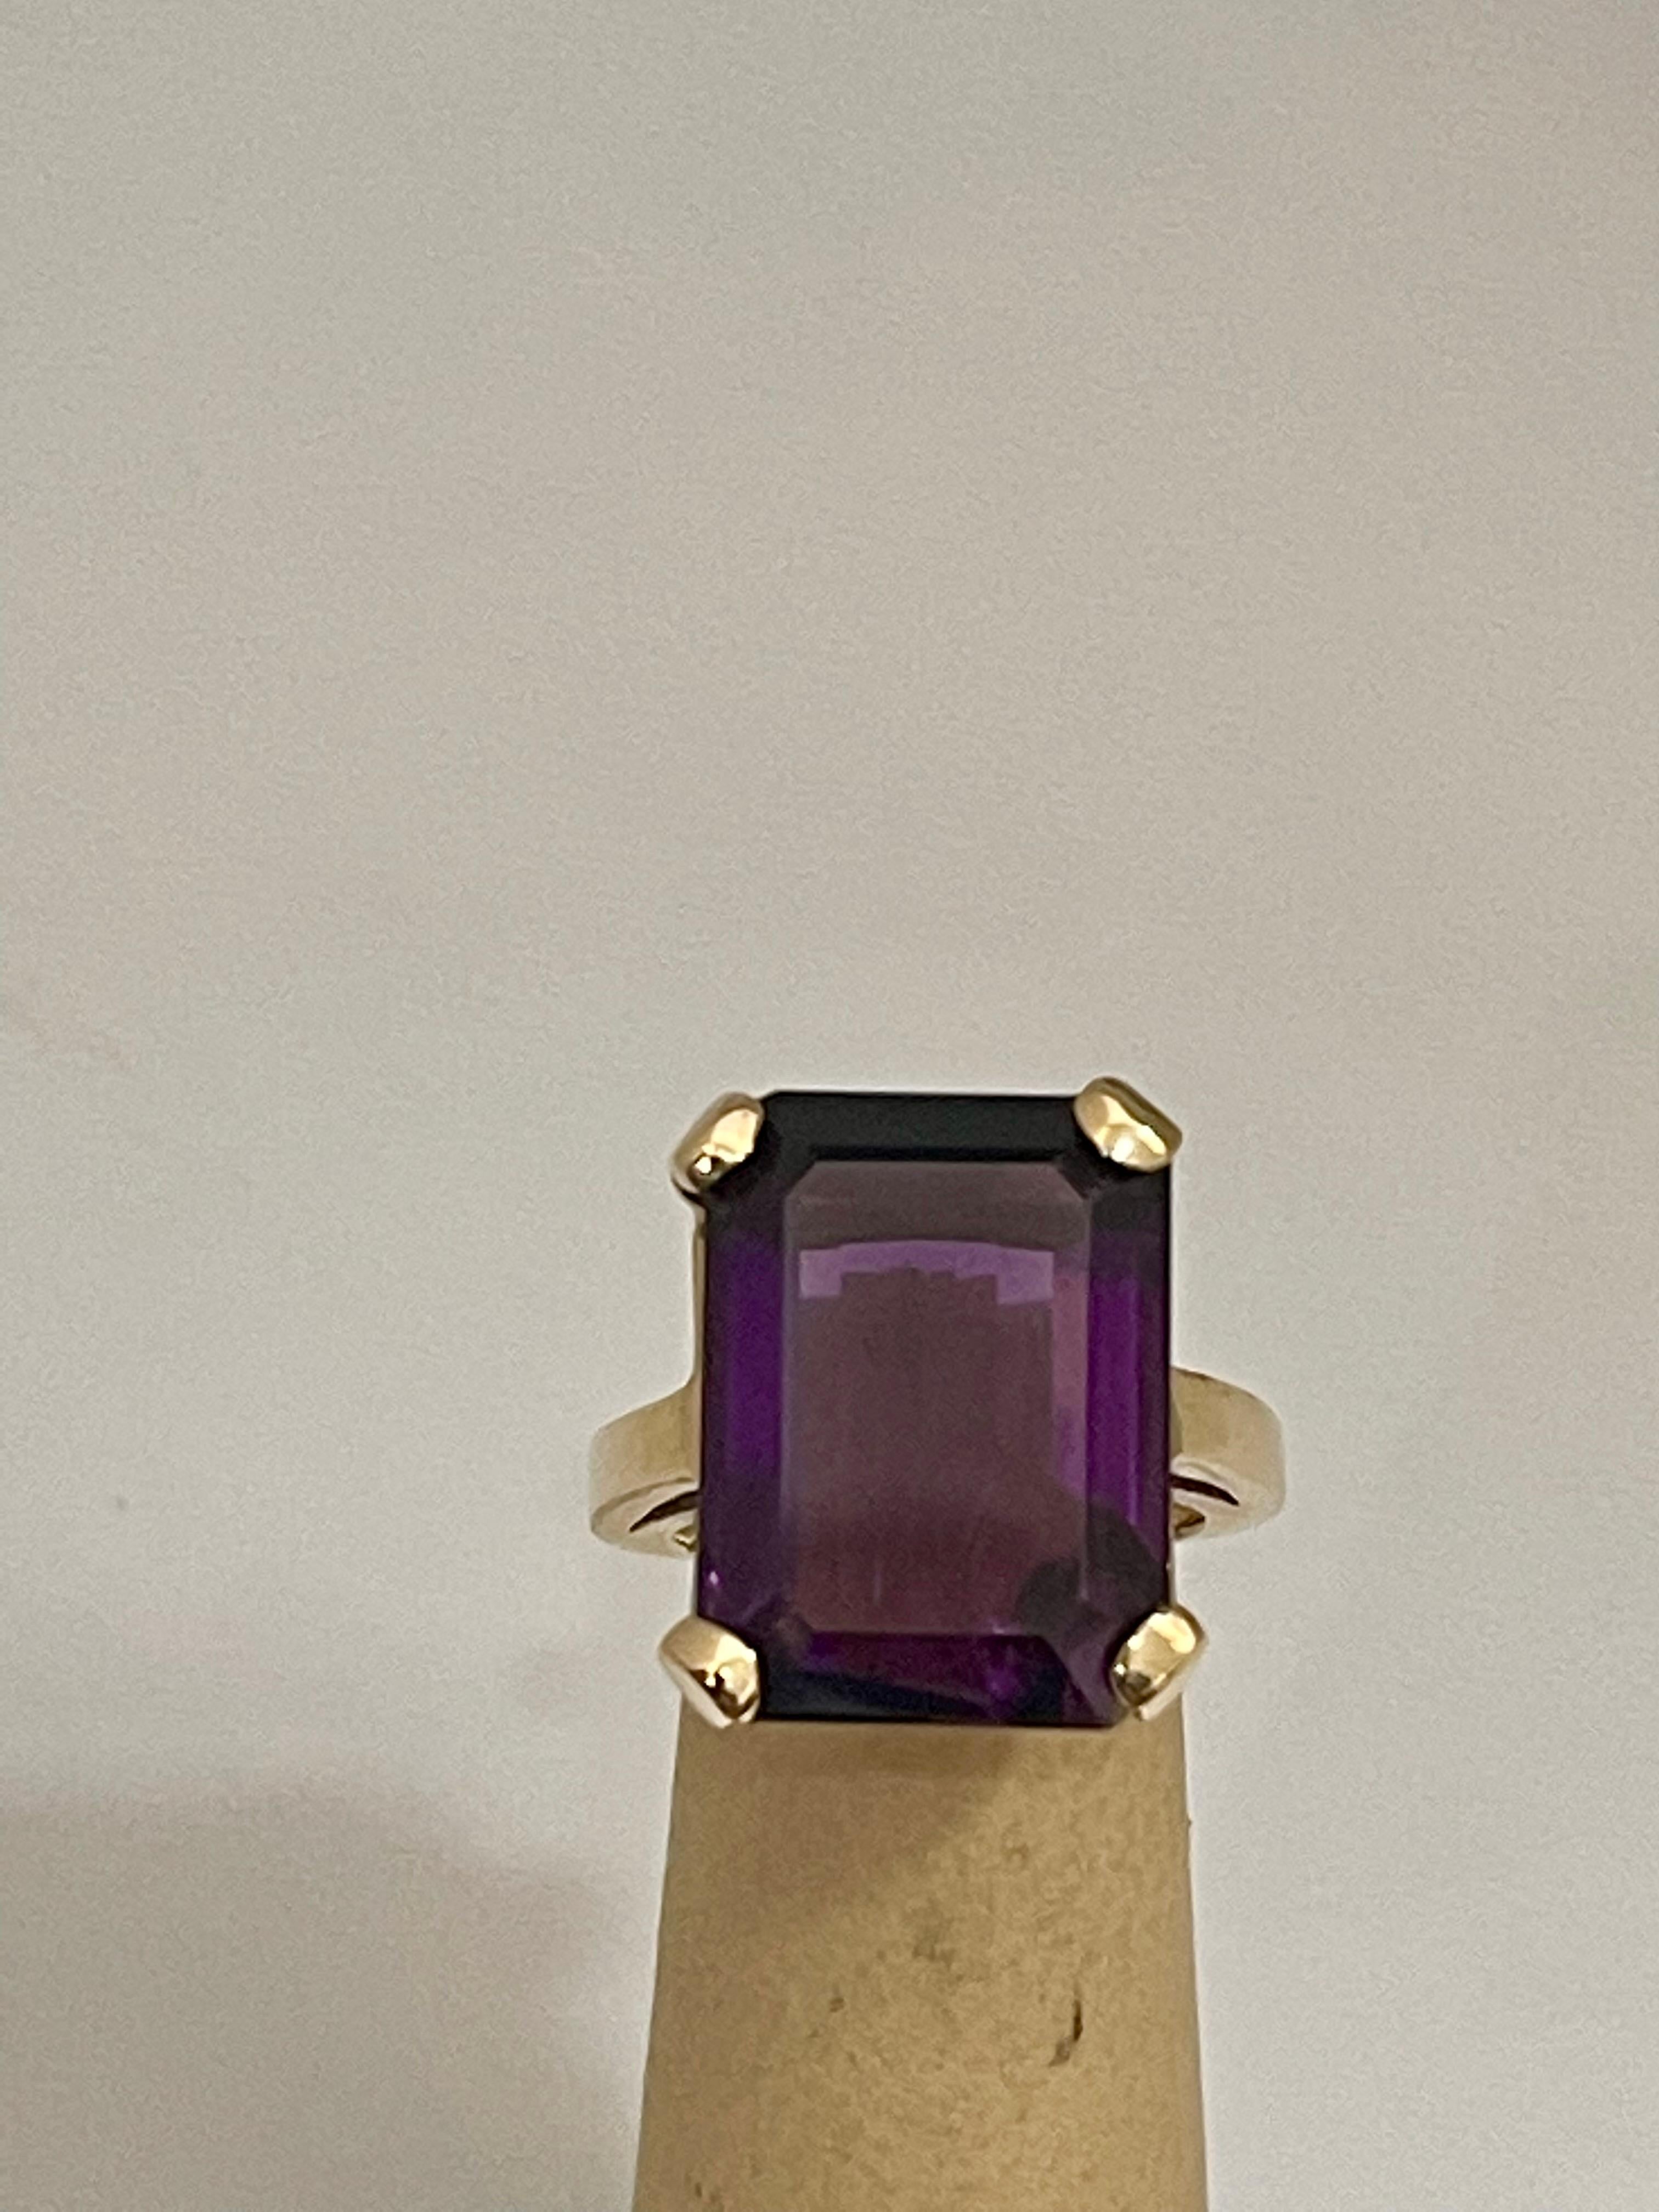 15 Carat Emerald Cut Amethyst Cocktail Ring in 14 Karat Yellow Gold For Sale 10